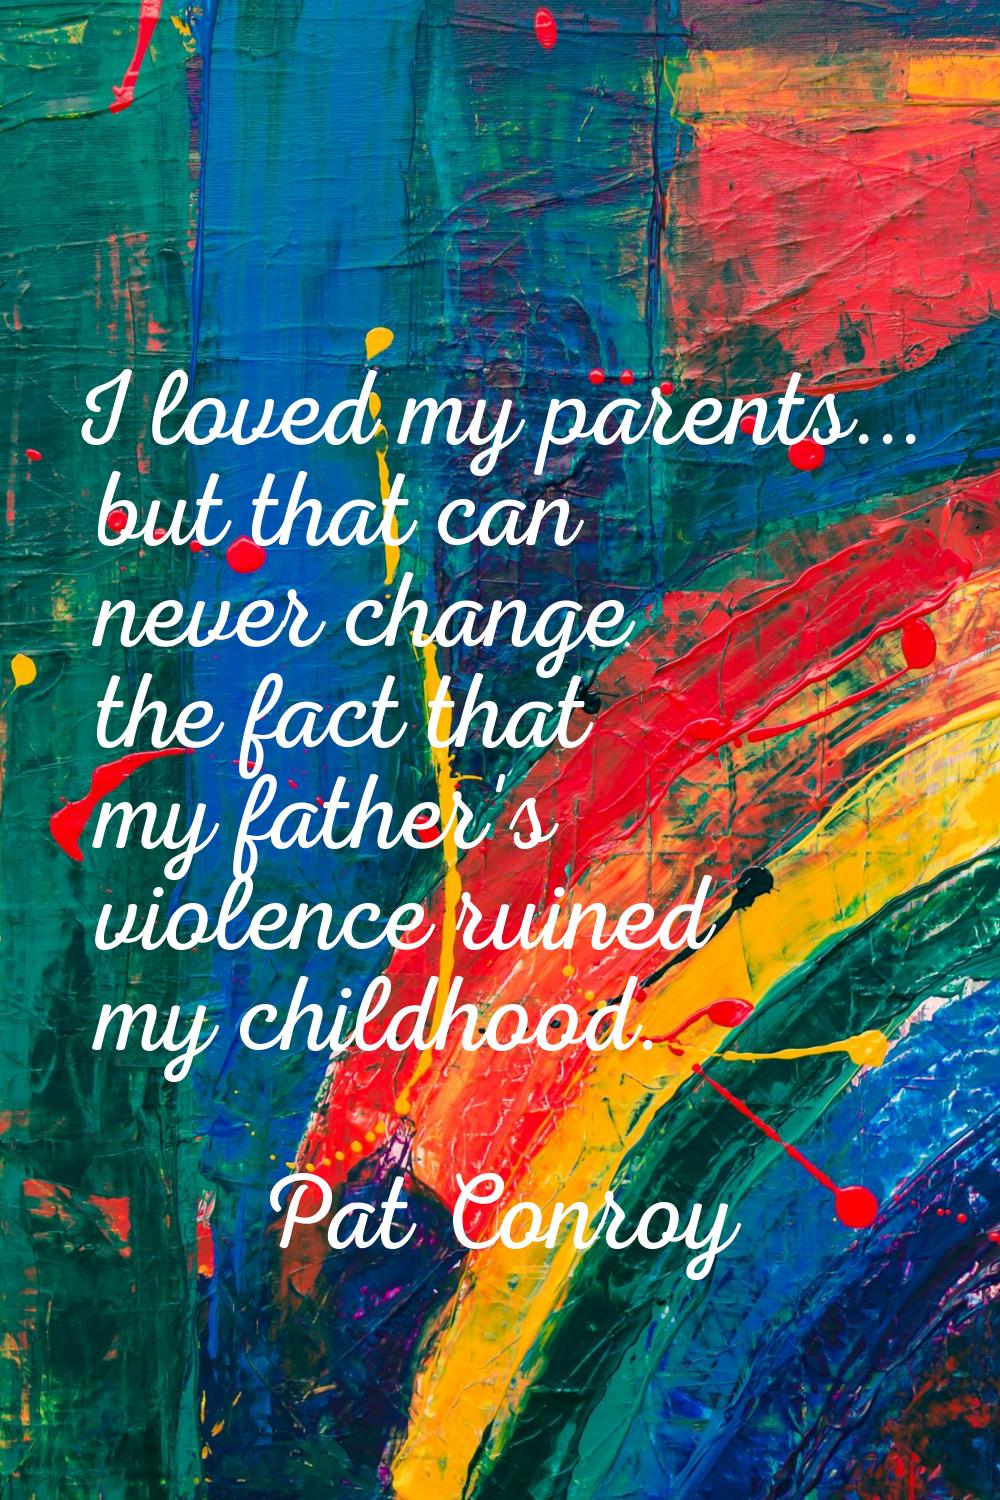 I loved my parents... but that can never change the fact that my father's violence ruined my childh